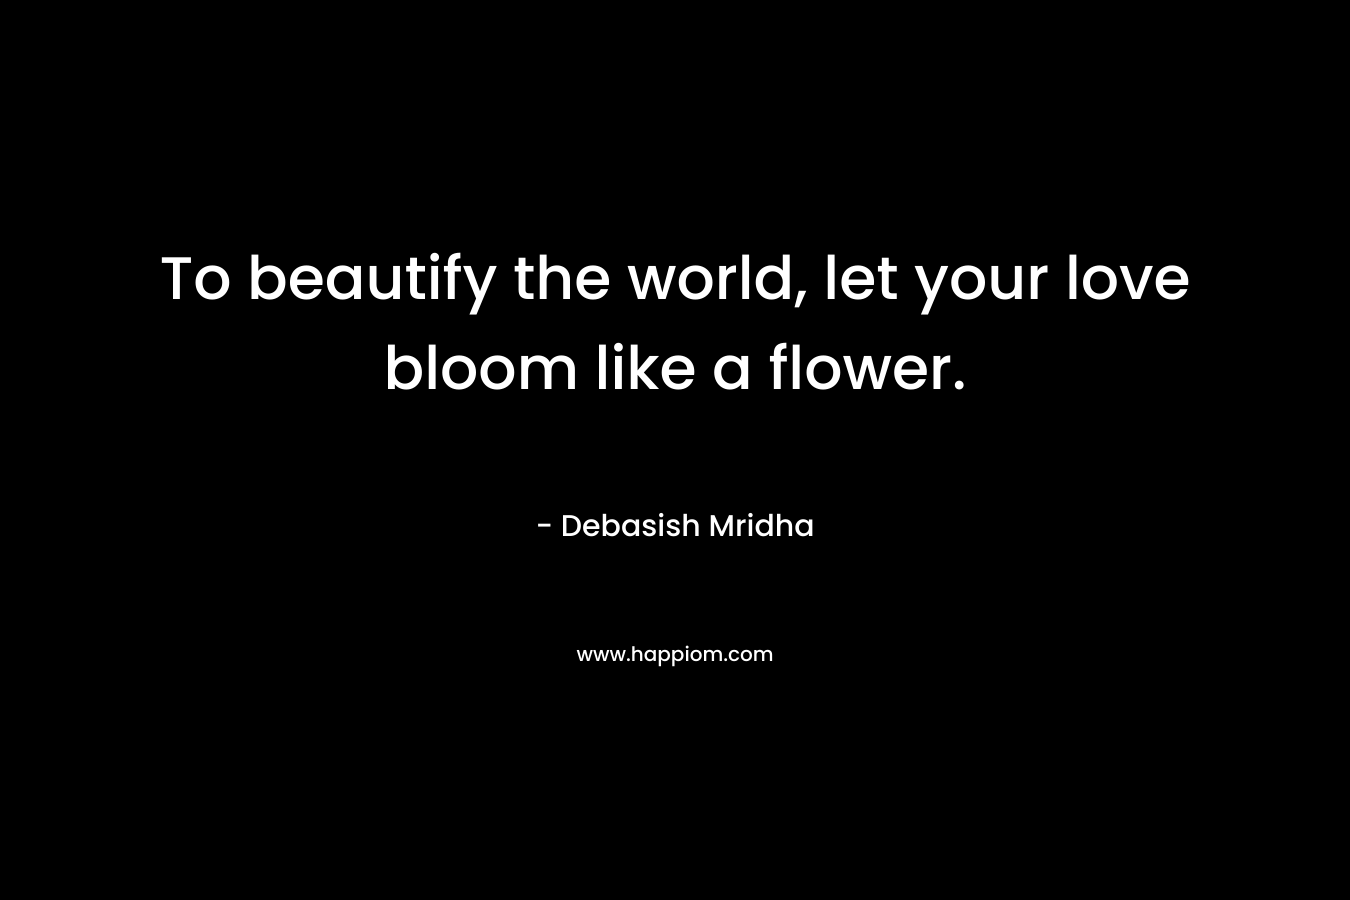 To beautify the world, let your love bloom like a flower. – Debasish Mridha